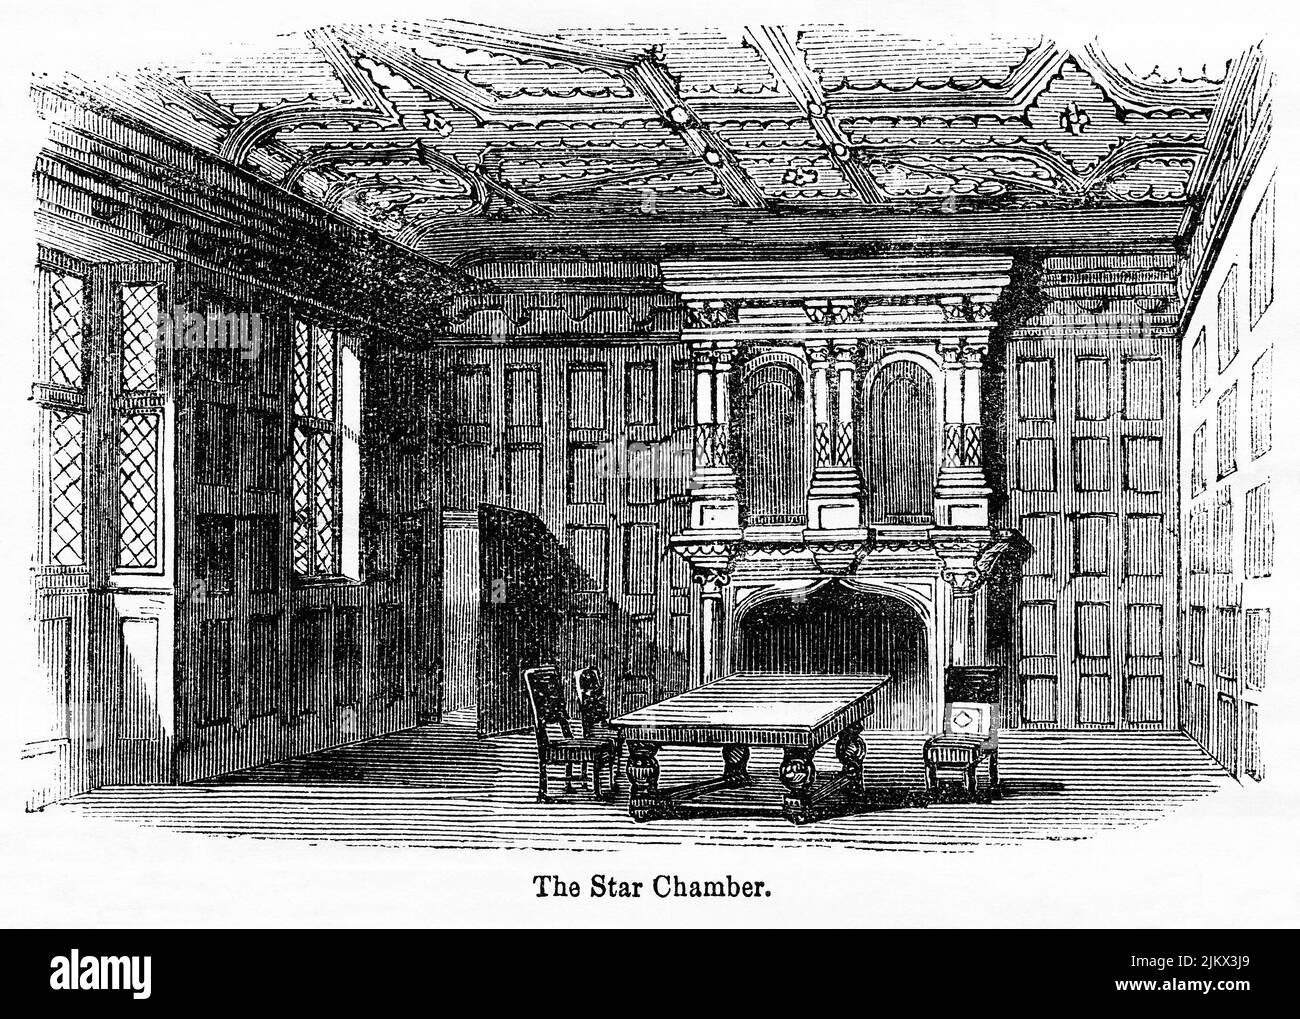 The Star Chamber, Illustration from the Book, 'John Cassel’s Illustrated History of England, Volume II', text by William Howitt, Cassell, Petter, and Galpin, London, 1858 Stock Photo